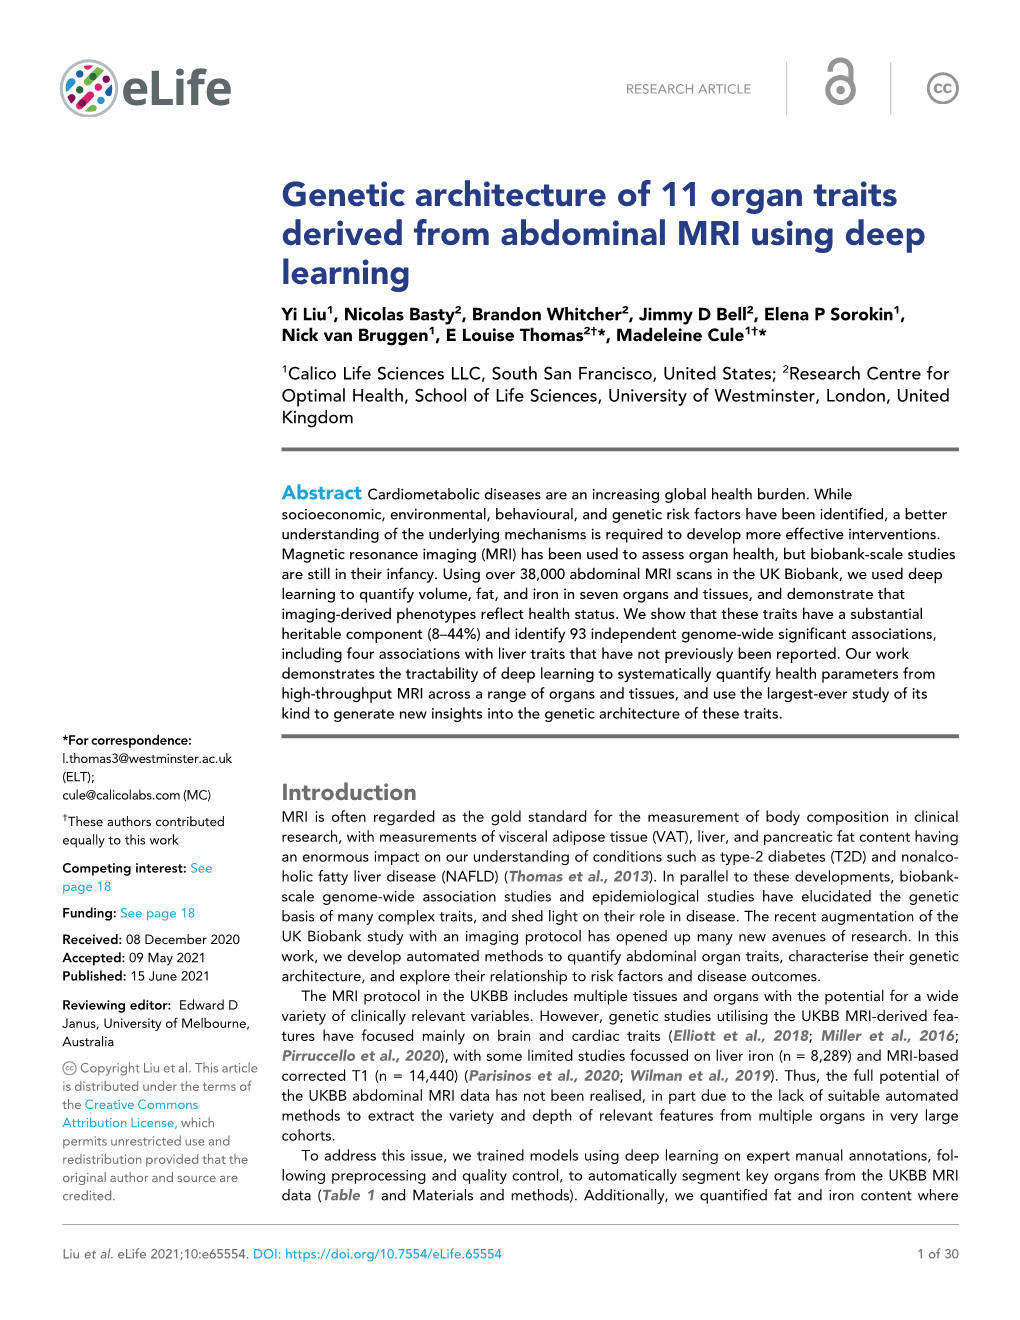 Genetic Architecture of 11 Organ Traits Derived from Abdominal MRI Using